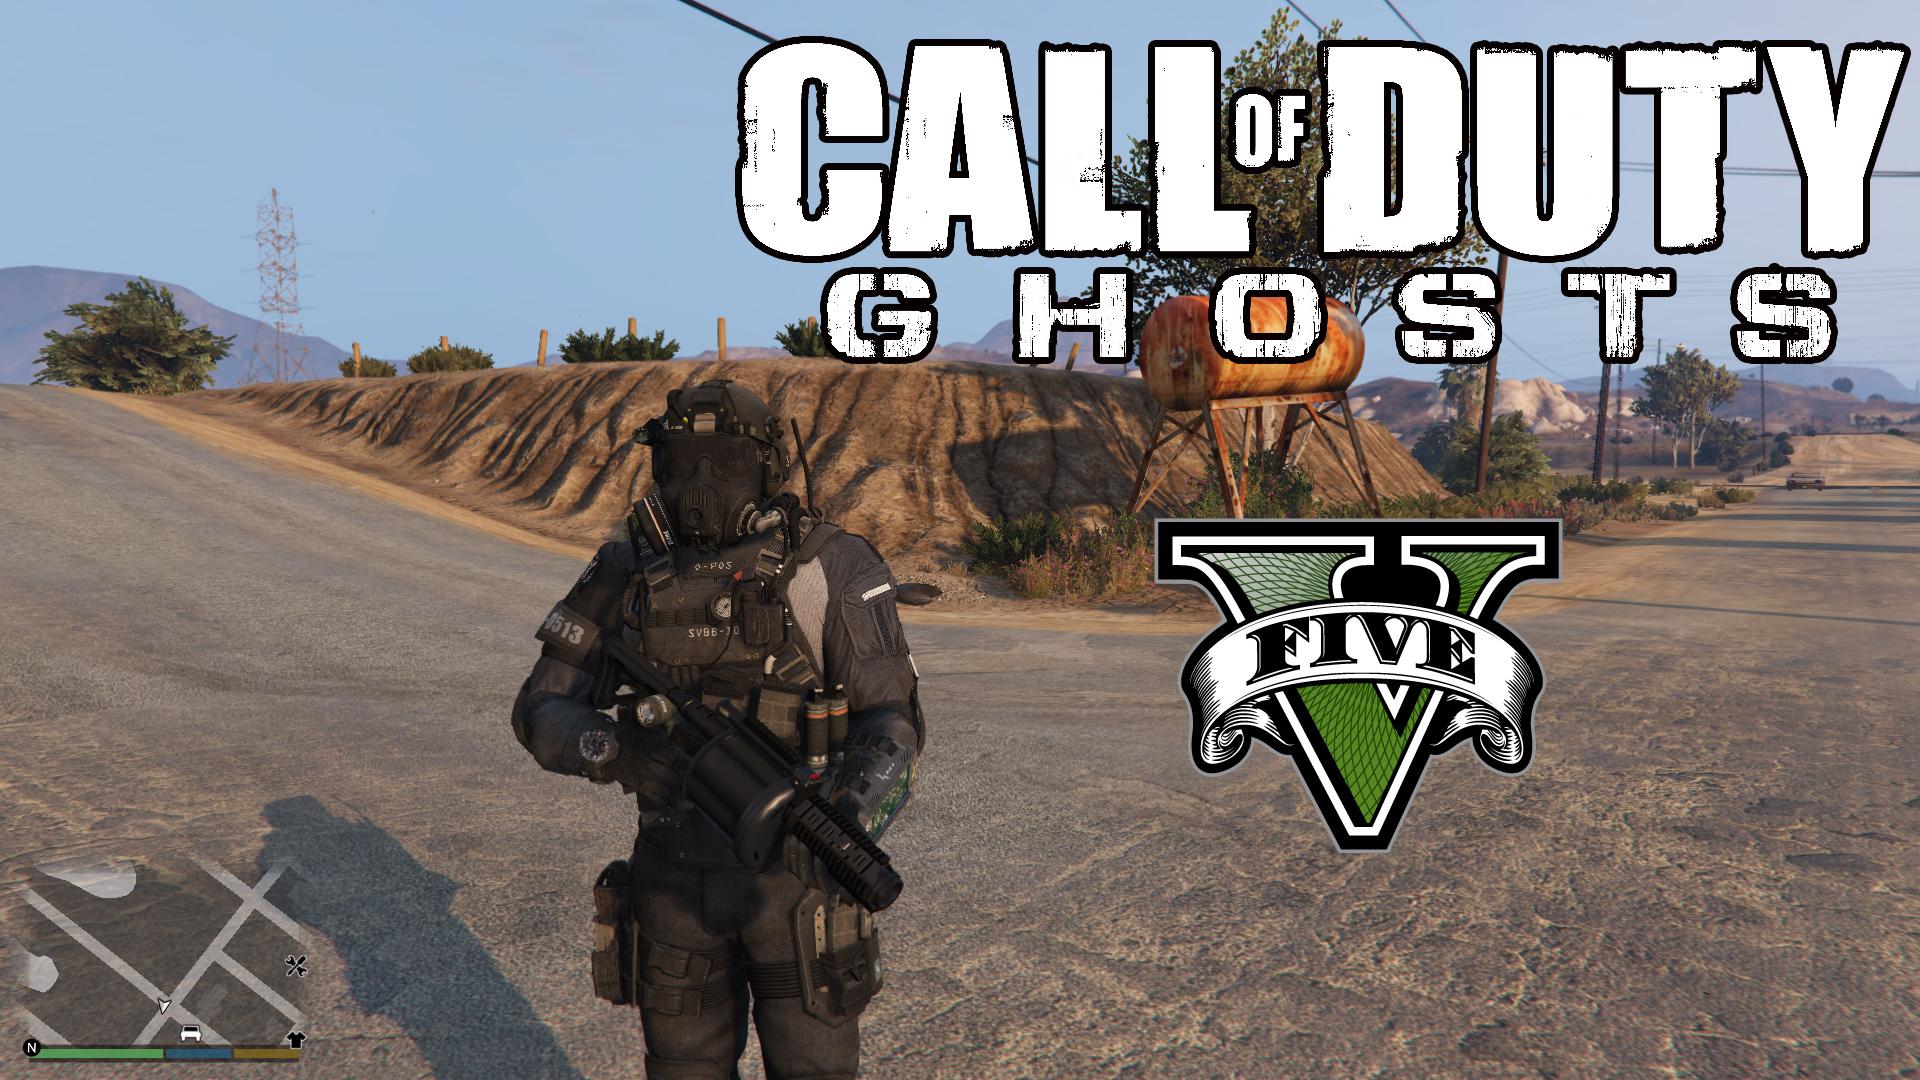 Will 'Call of Duty: Ghosts' Beat Out 'Grand Theft Auto 5'?